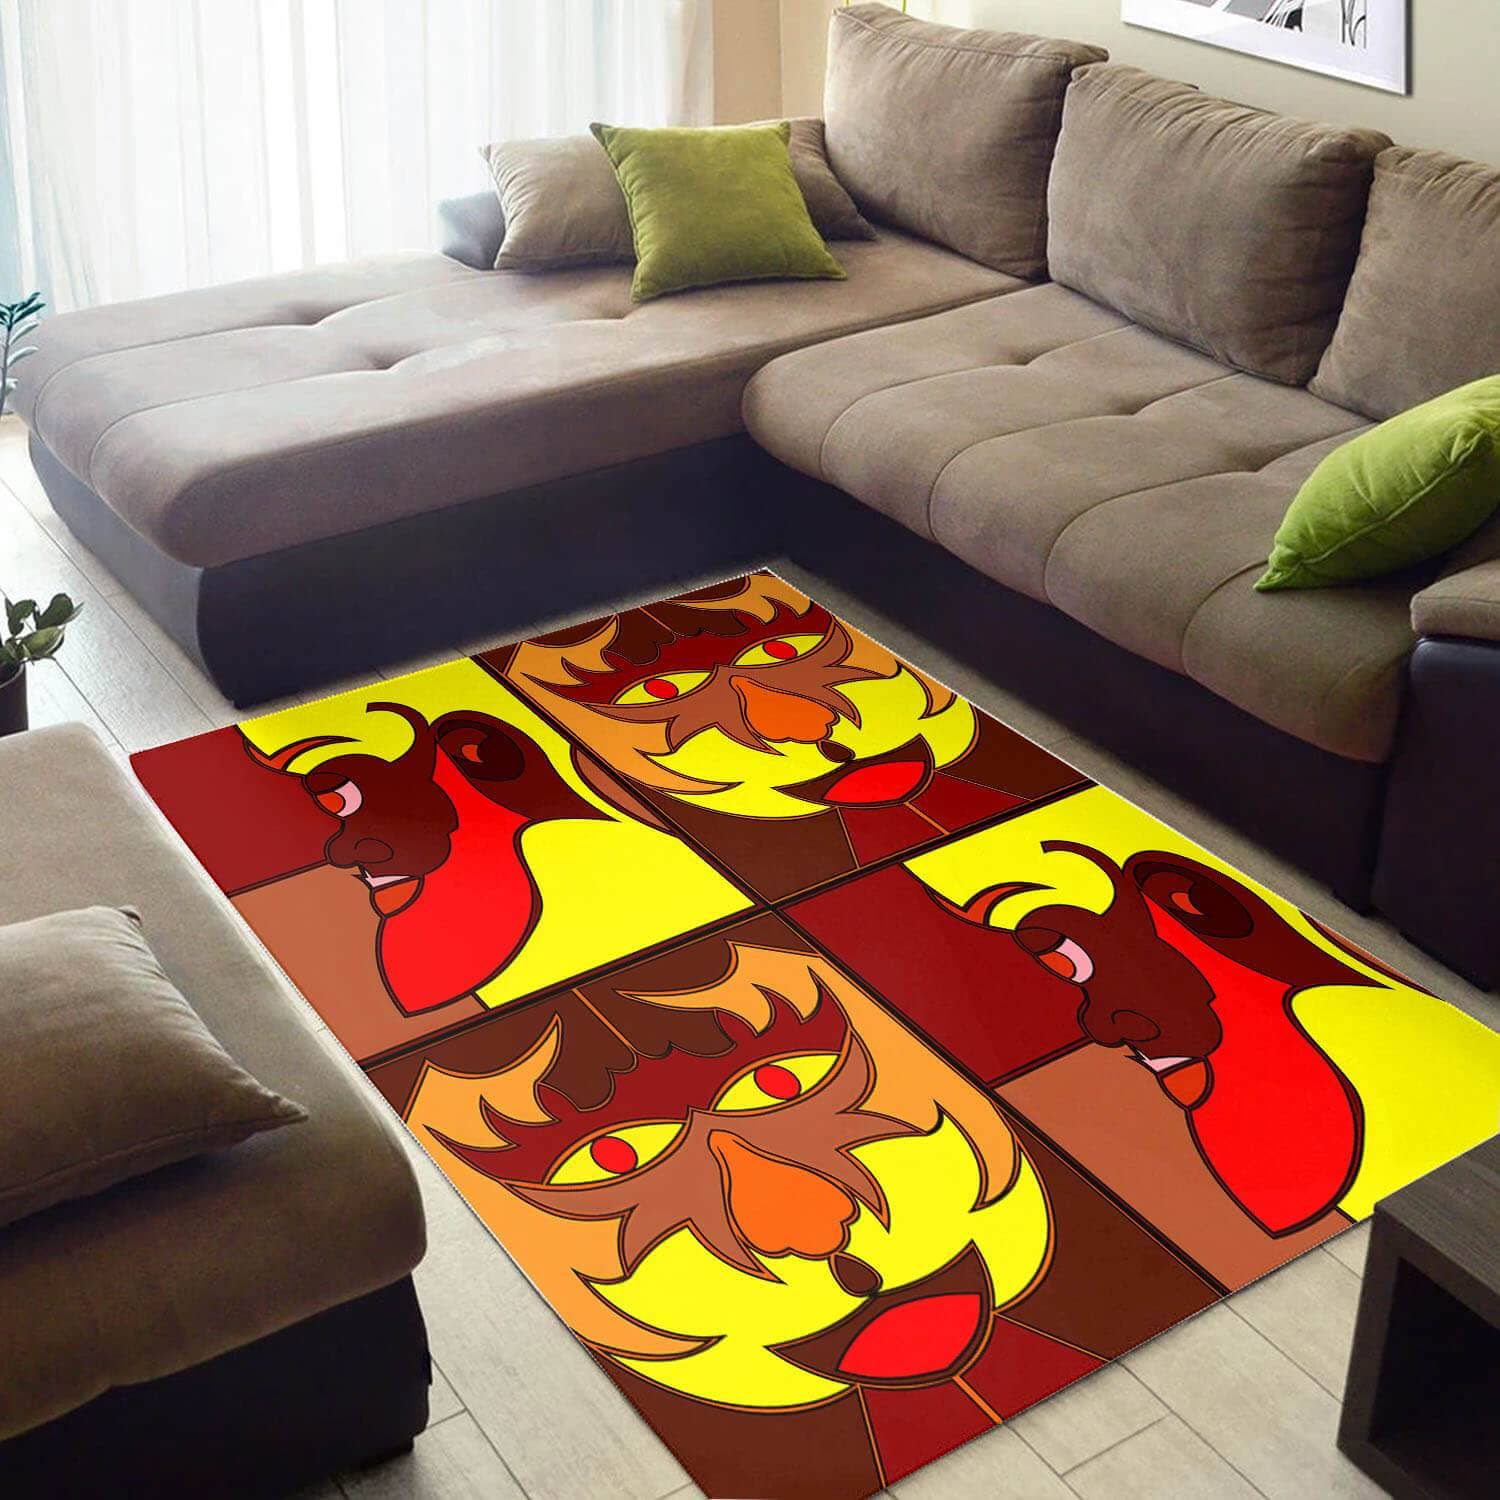 Cool African Amazing American Art Afrocentric Design Floor Living Room Rug